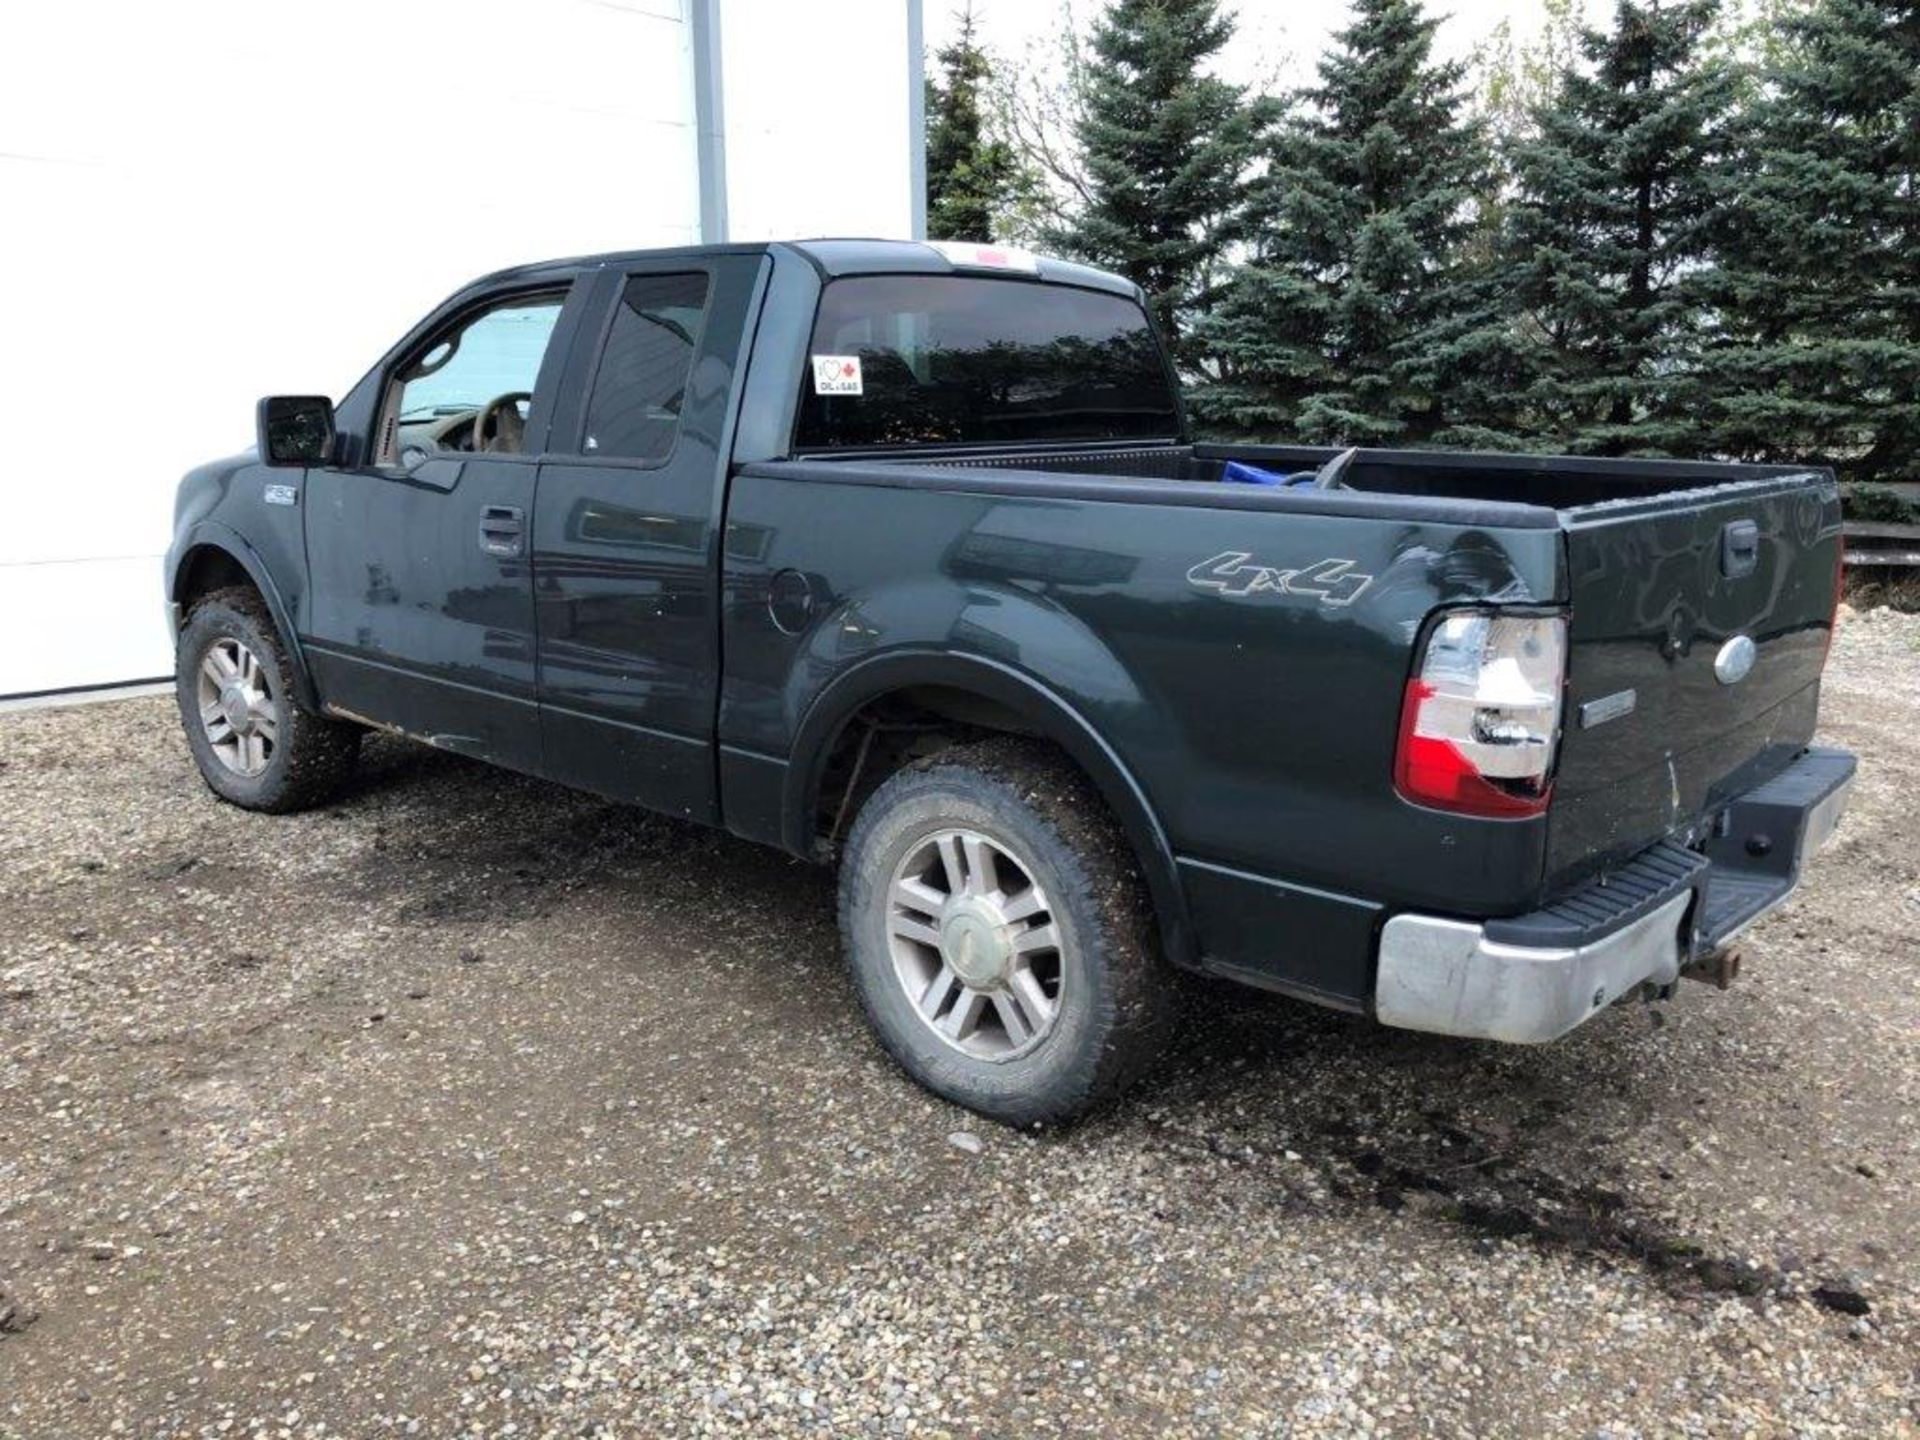 2006 FORD F150 LARIAT P/U TRUCK, 4X4, EXT CAB, LEATHER, 235,000KM SHOWING, S/N 1FTPX14556FA86613 - Image 3 of 6